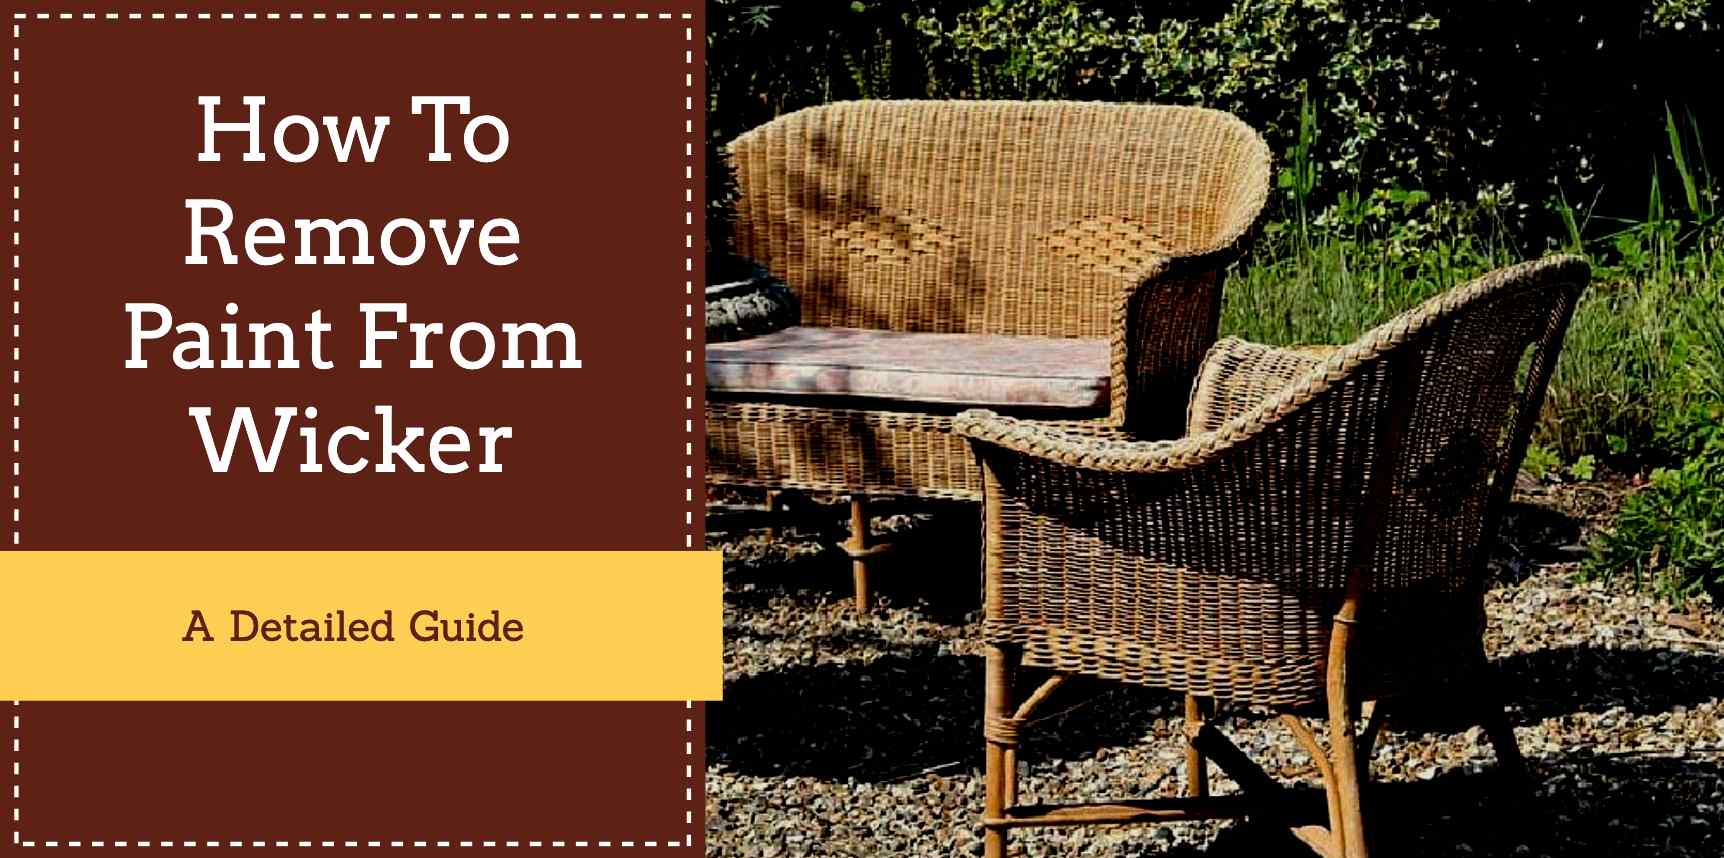 removing paint from wicker furniture